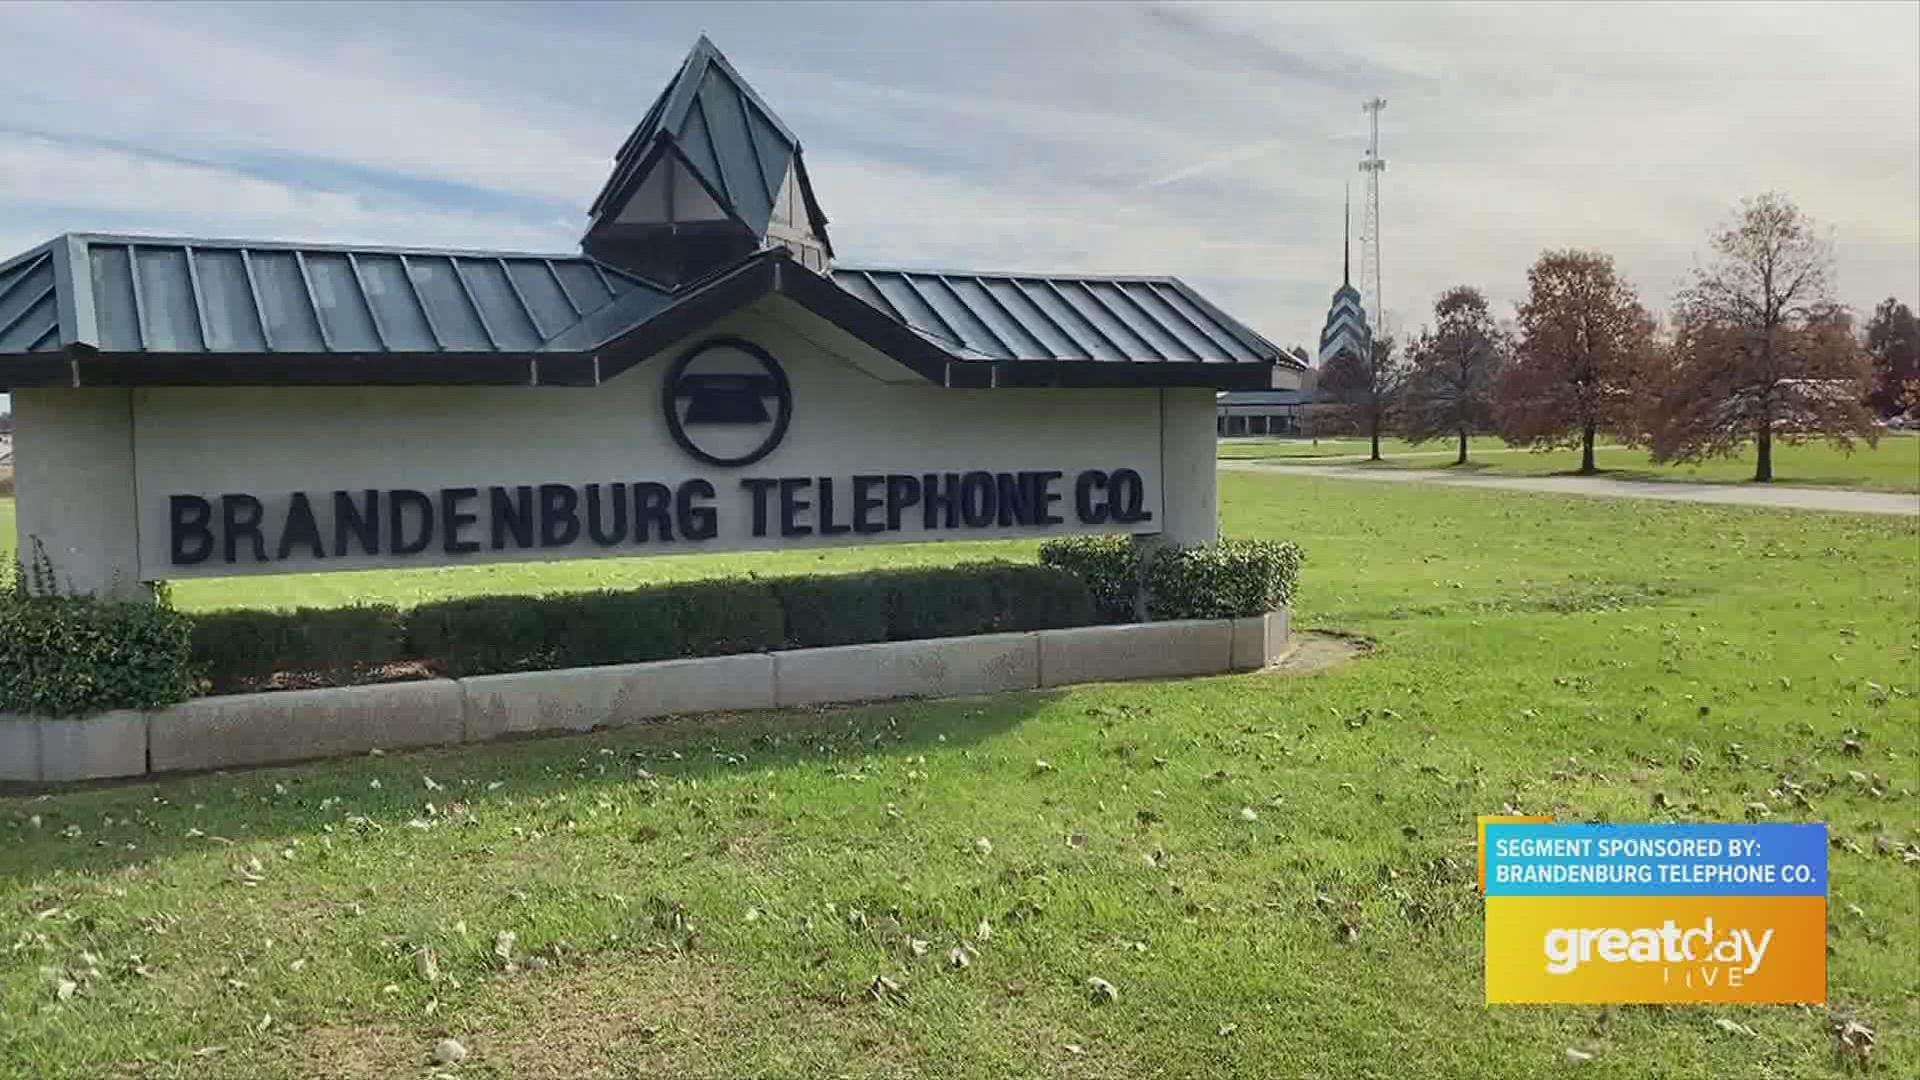 To learn more about Brandenburg Telephone Co., call 270-422-2121 or visit bbtel.com.